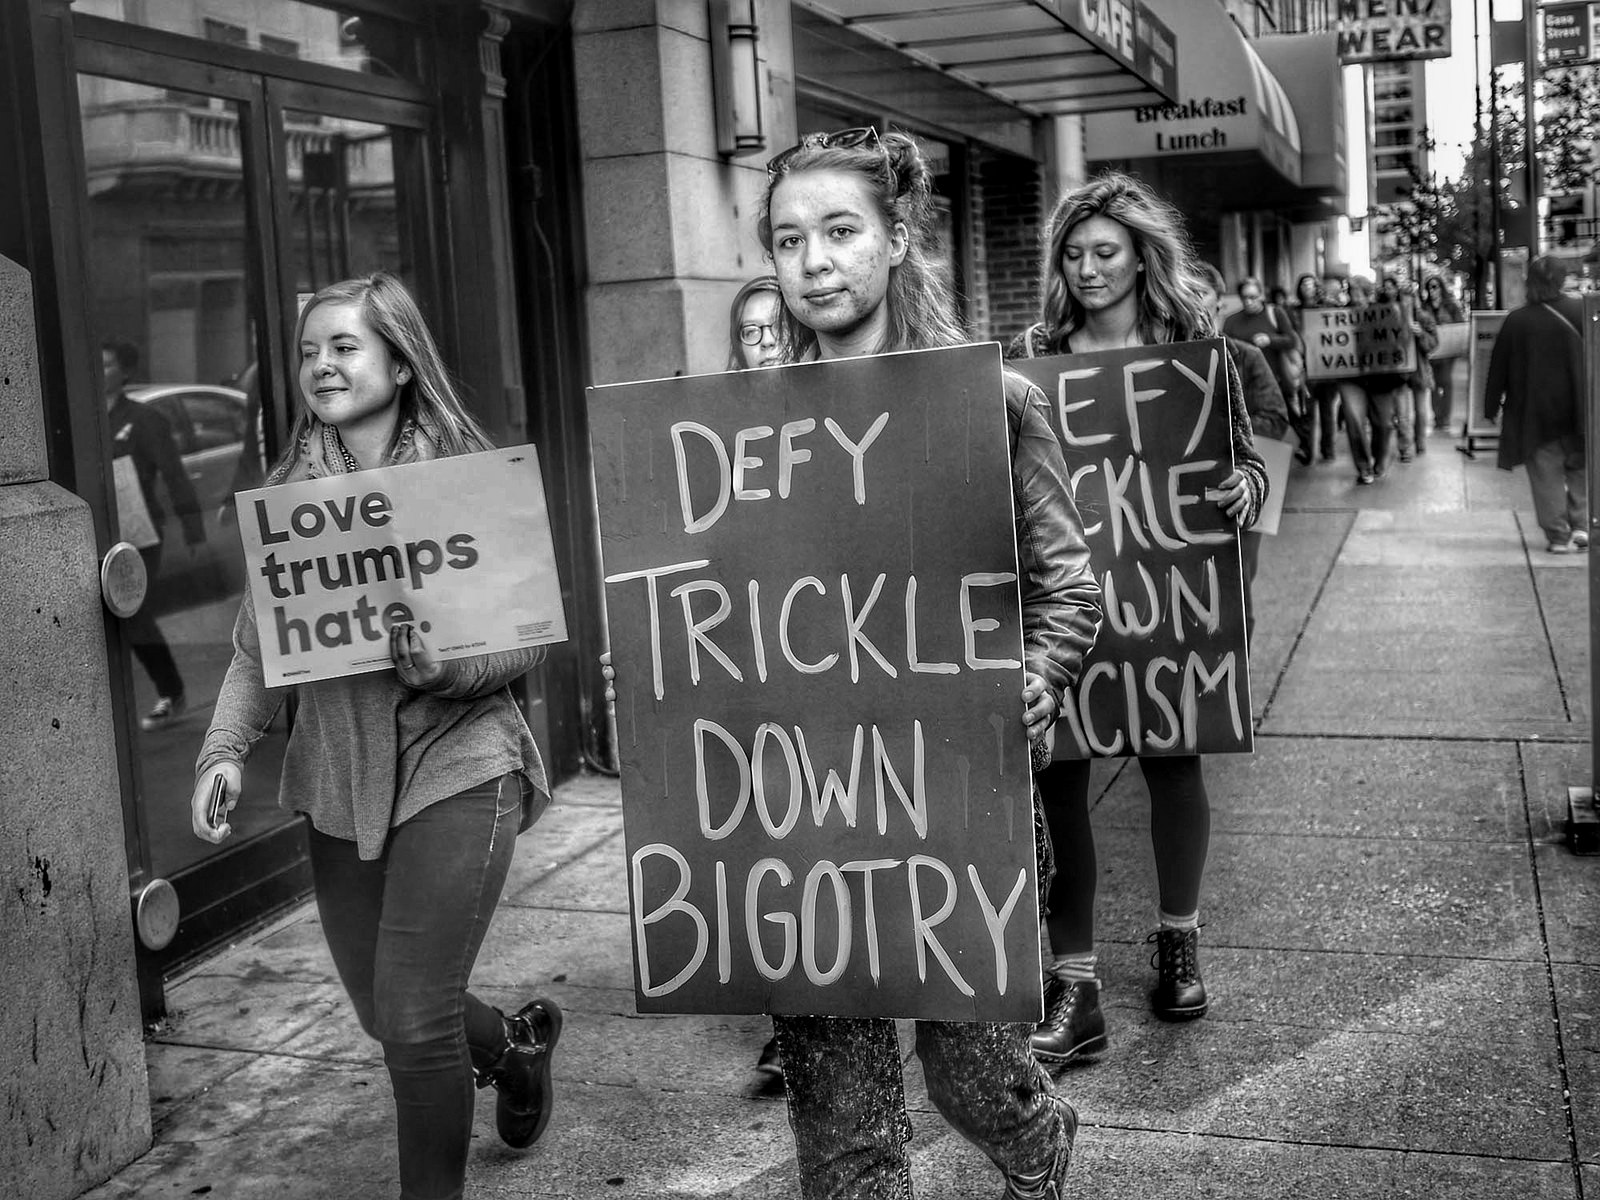 Women holding protest signs that read "Defy Trickle Down Bigotry," and "Love trumps hate."